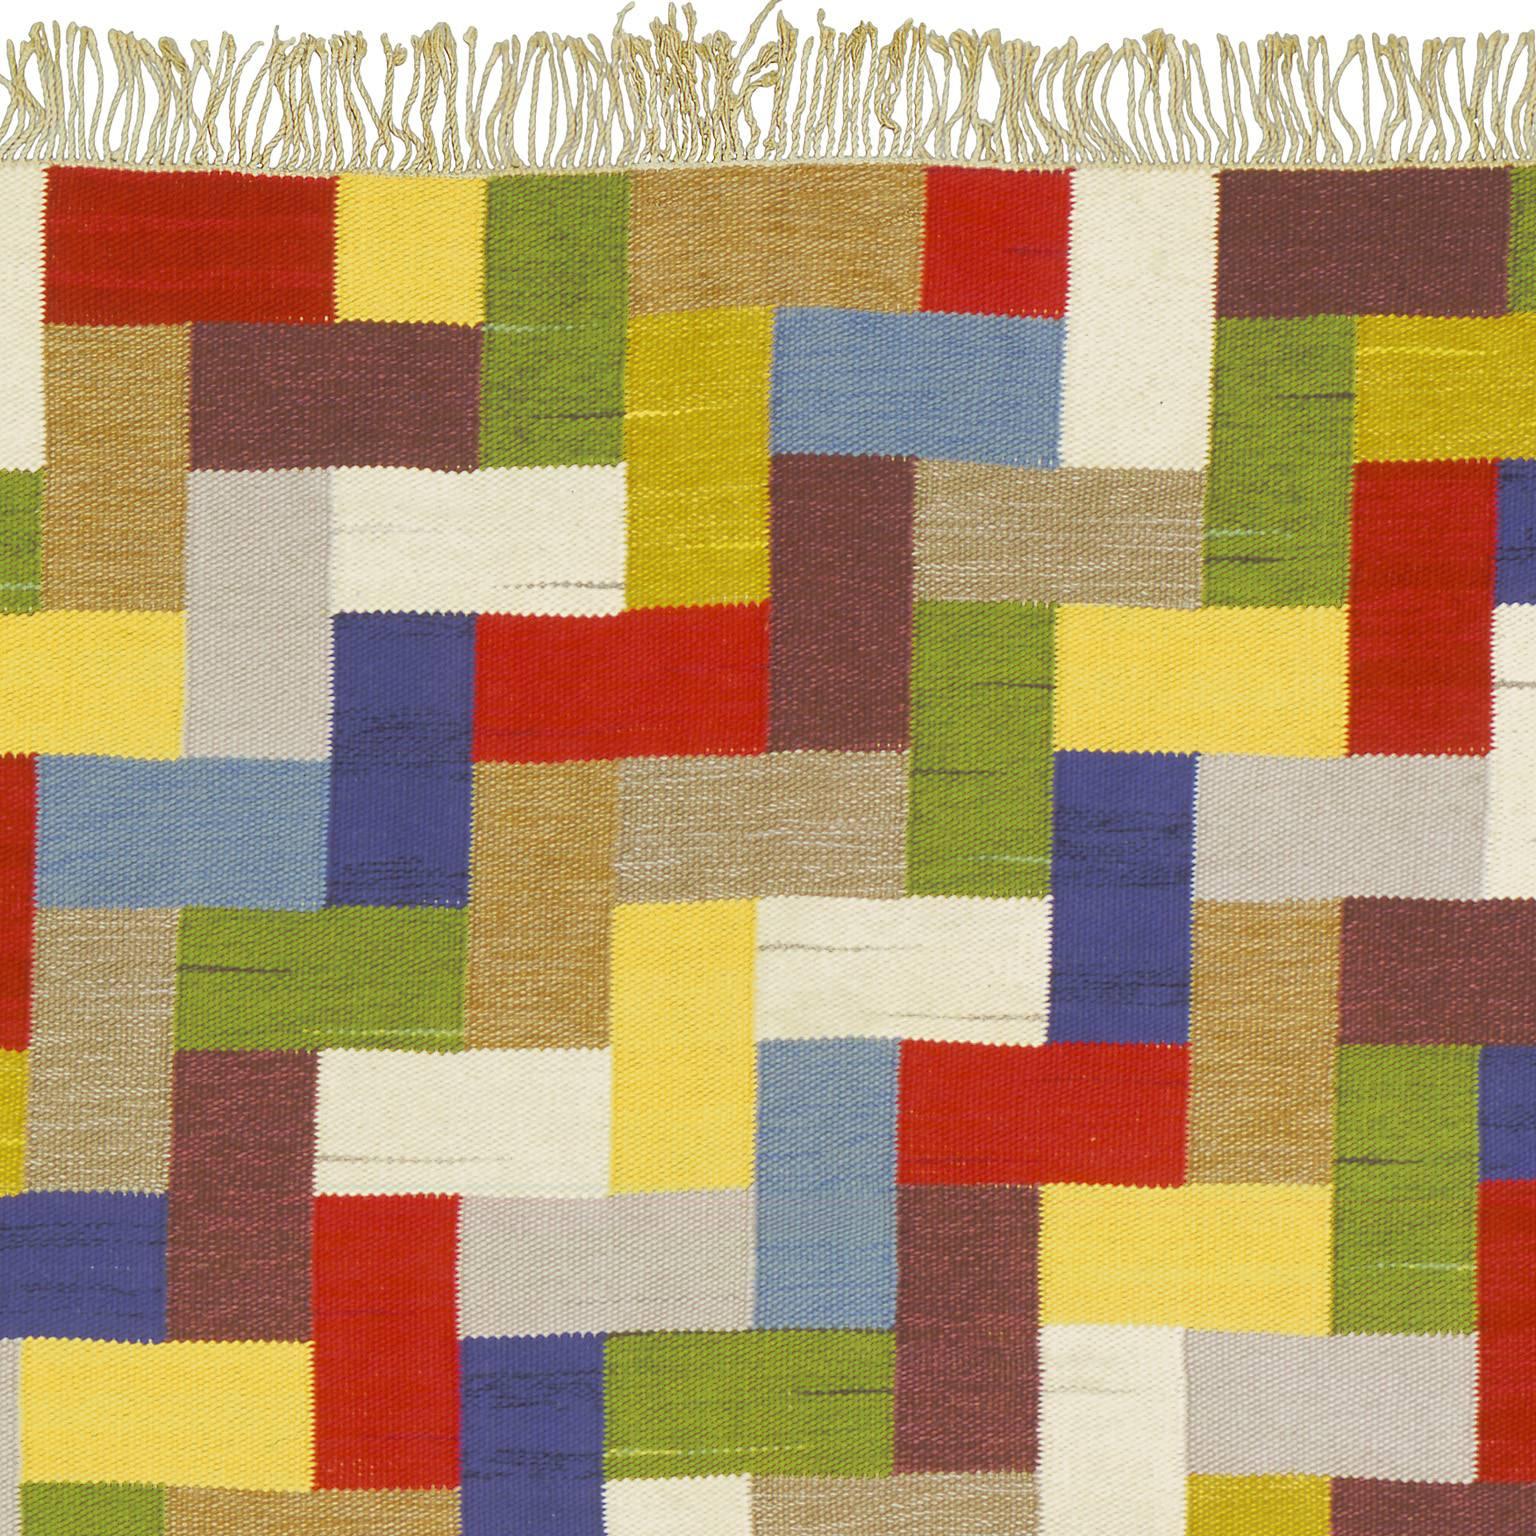 Mid-20th Century Swedish Flat-Weave Carpet by Ingrid Hellman-Knafve In Excellent Condition For Sale In New York, NY